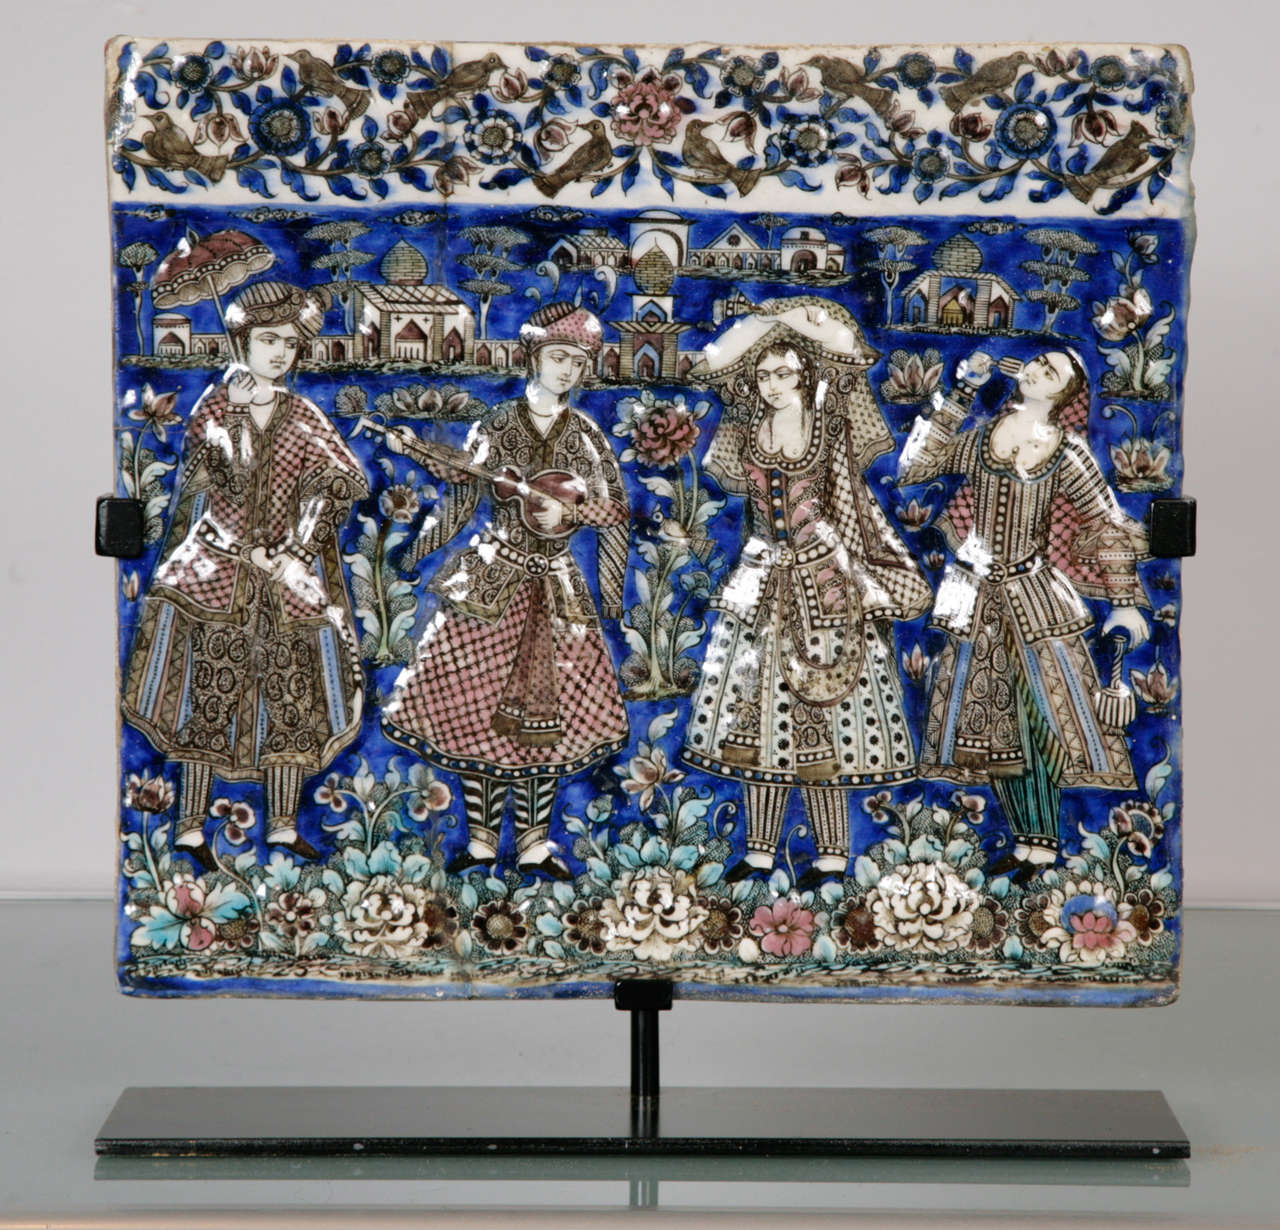 A polychrome tile moulded in relief, the scene depicting musicians and dancers. The figures depicted are dressed in Qajar court costume; the far left figure seen holding a parasol. The musicians are standing in front of a landscape with various